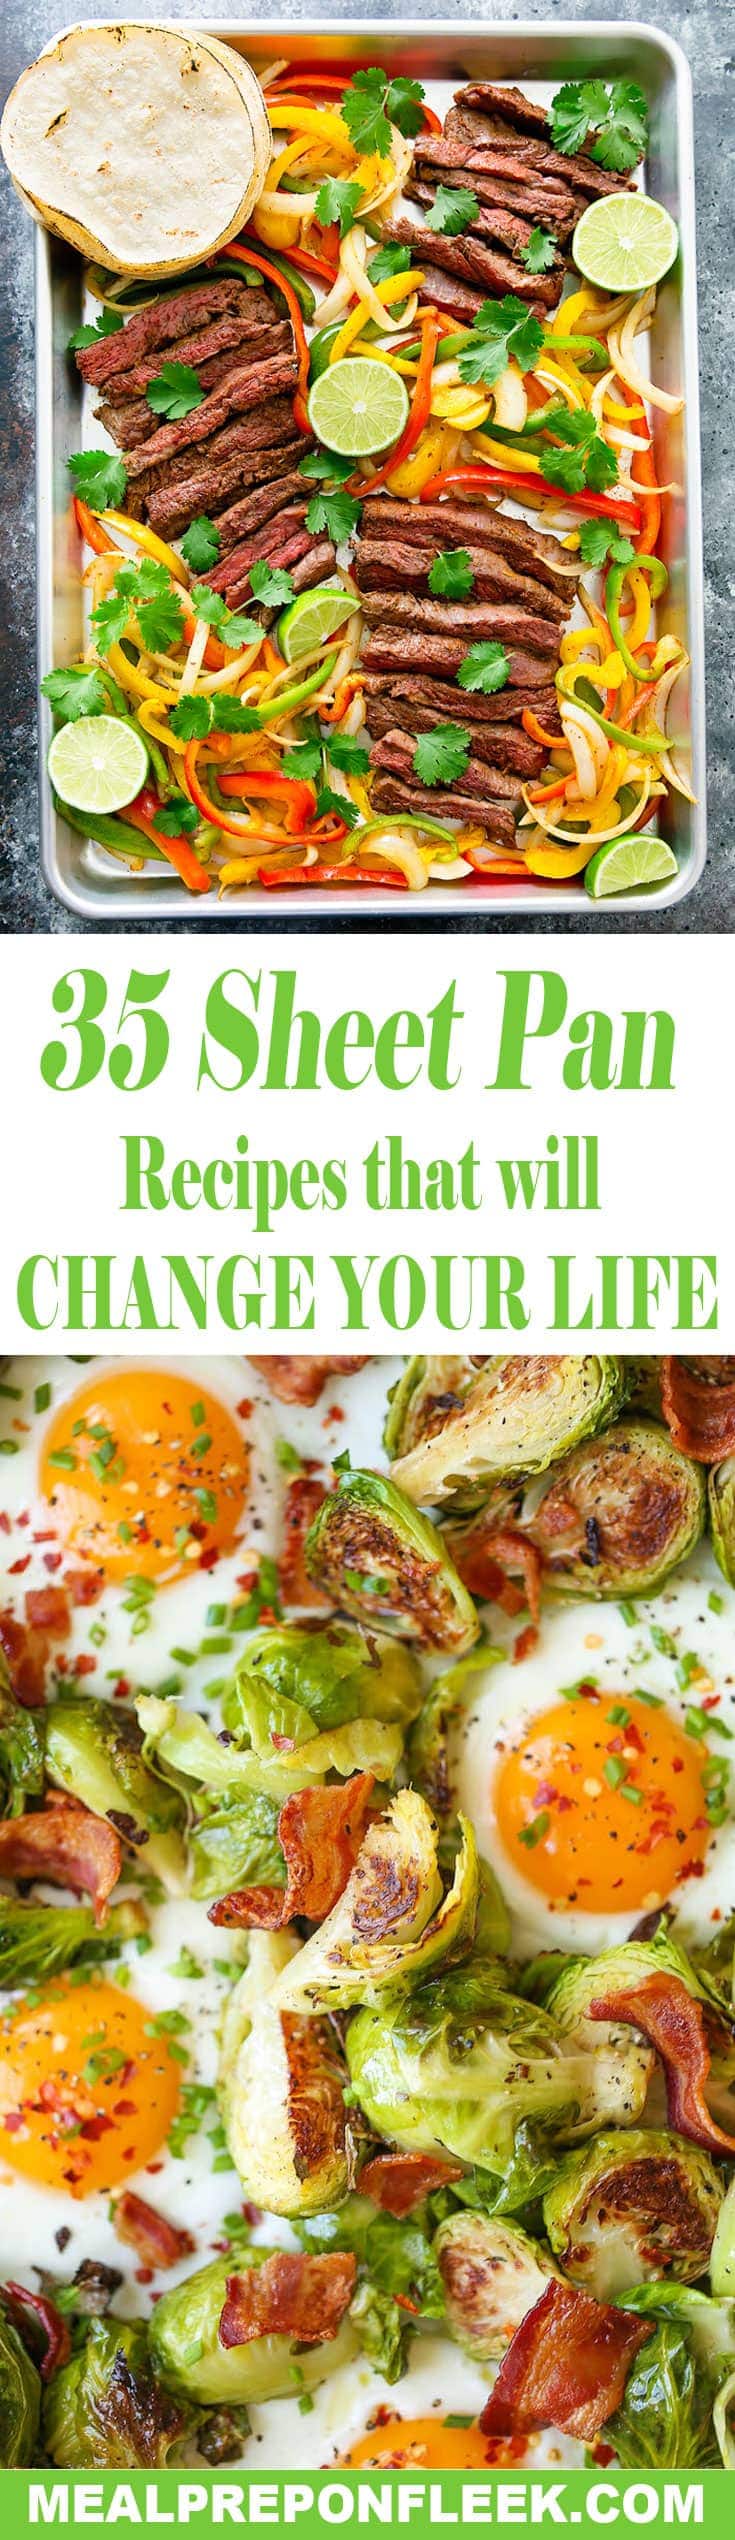 sheet pan recipes that will change your life